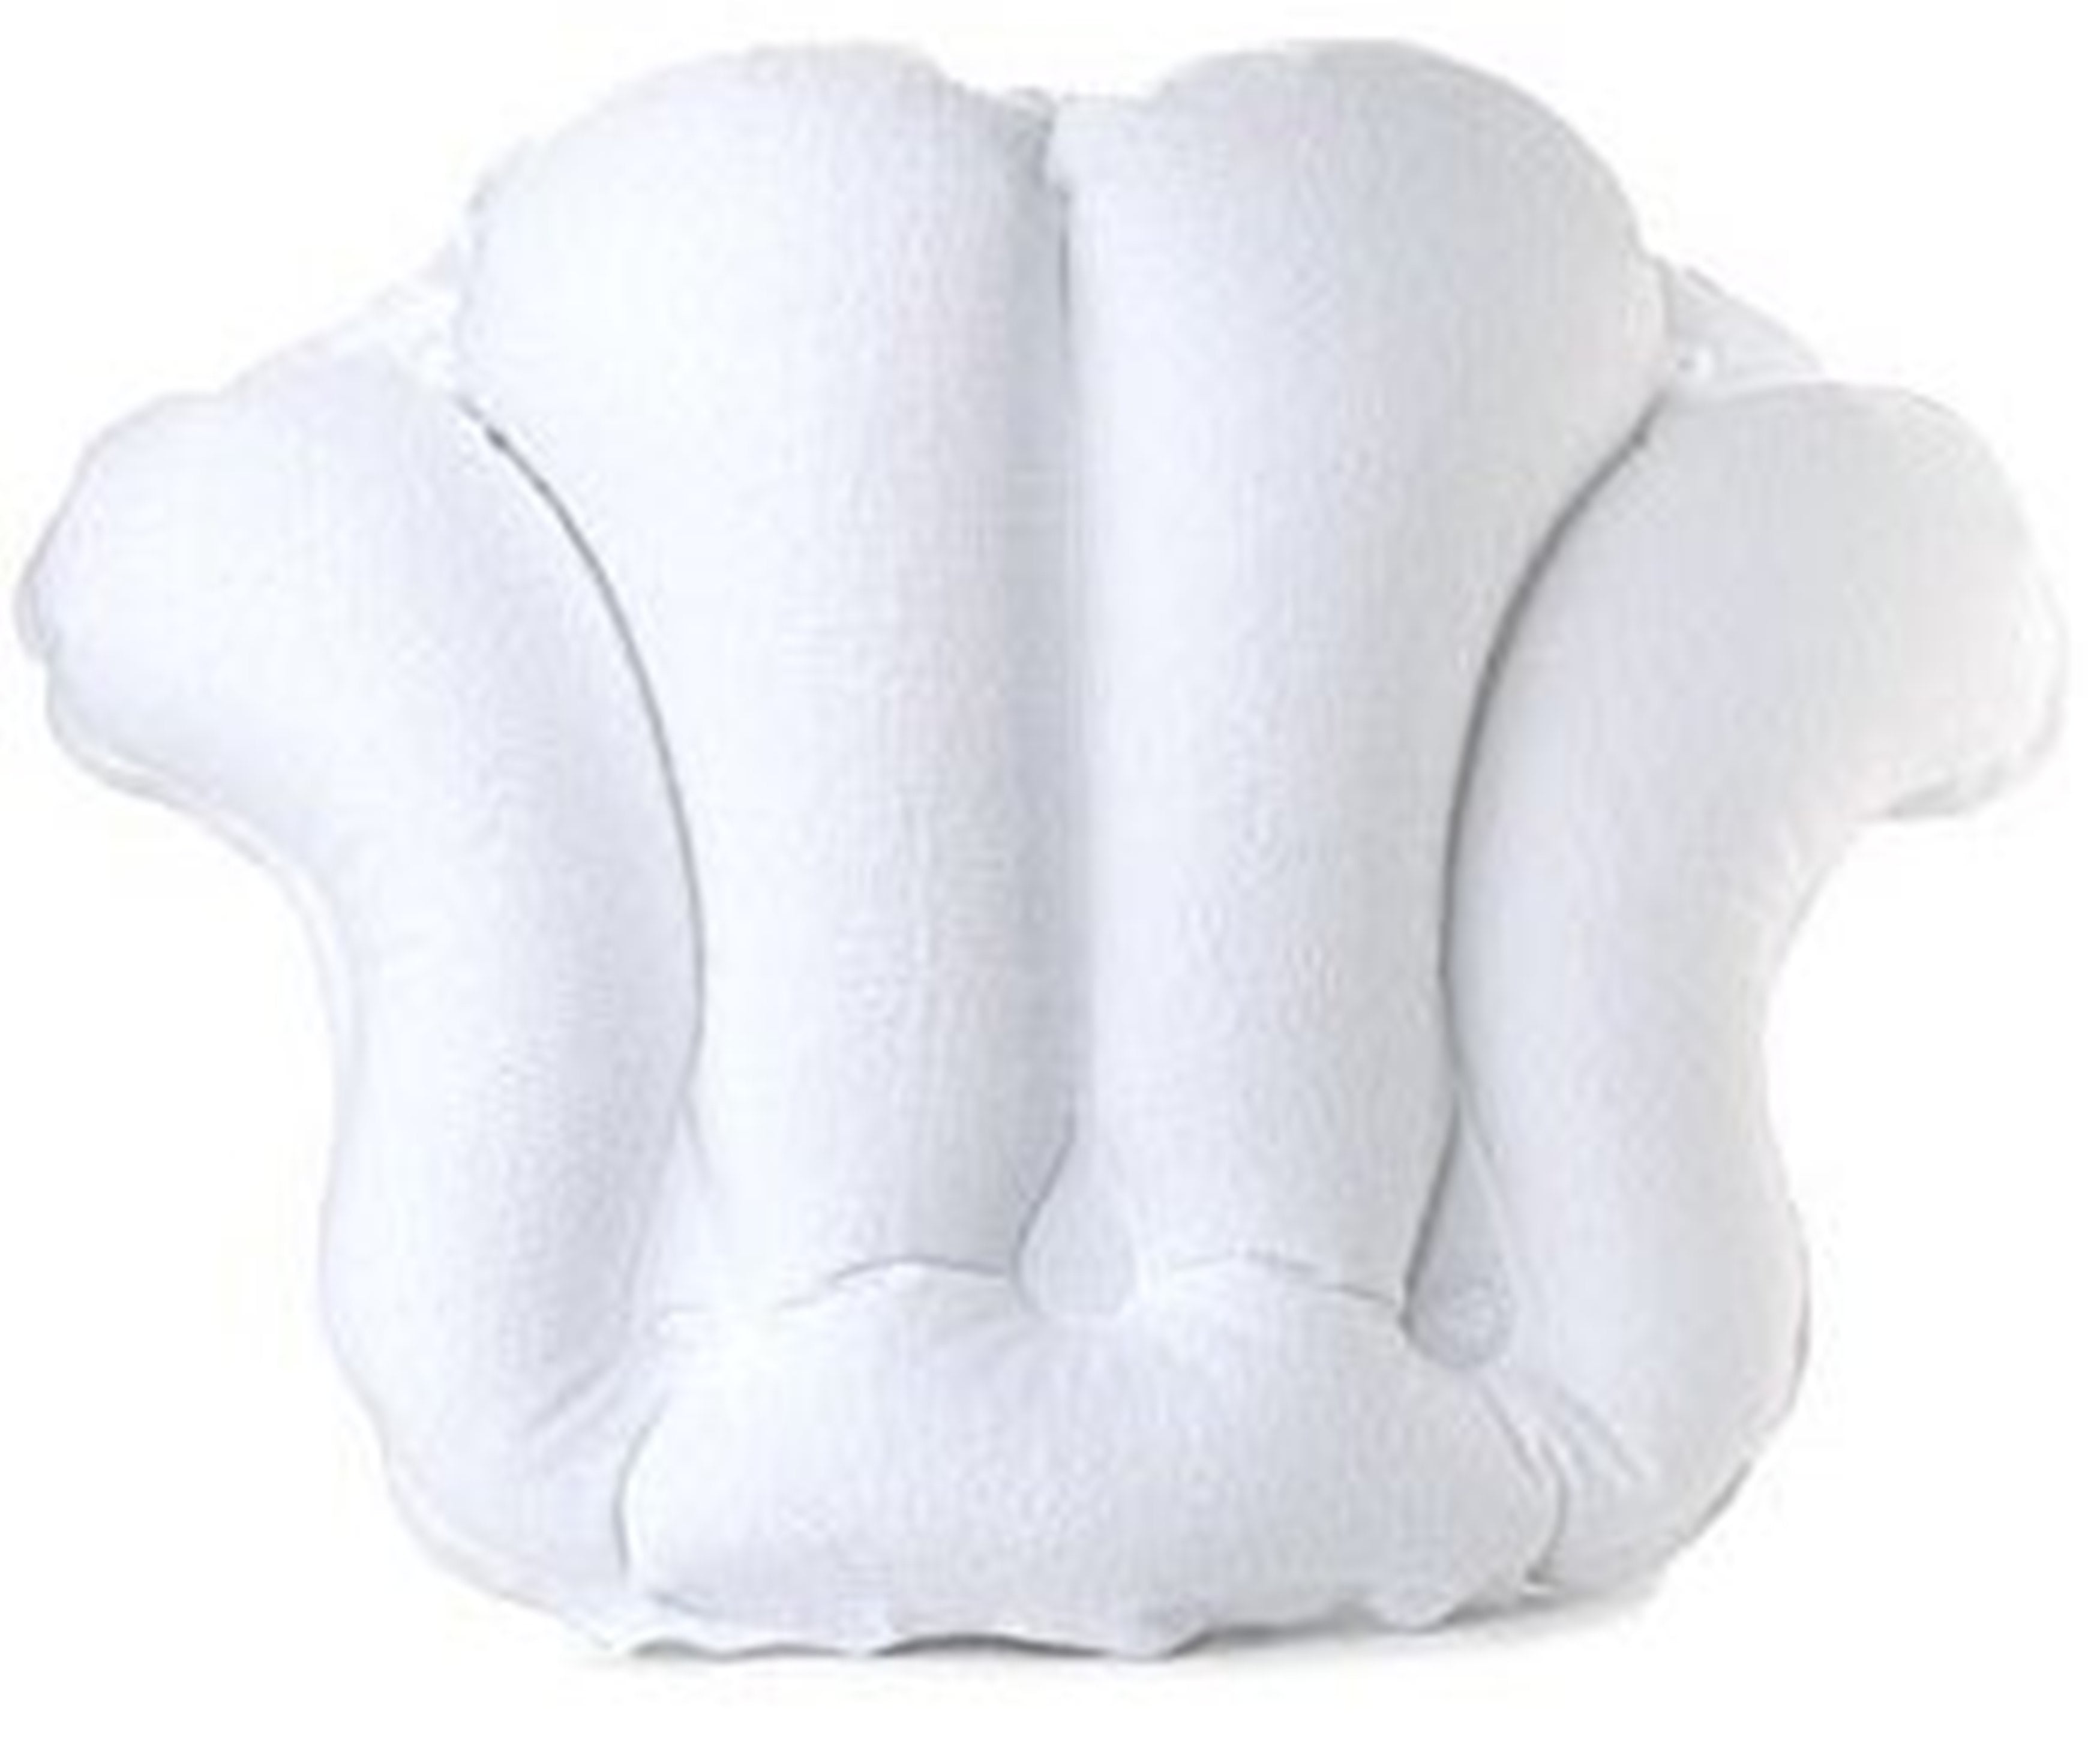 Terry Covered Bath Pillow - Natural – Earth Therapeutics